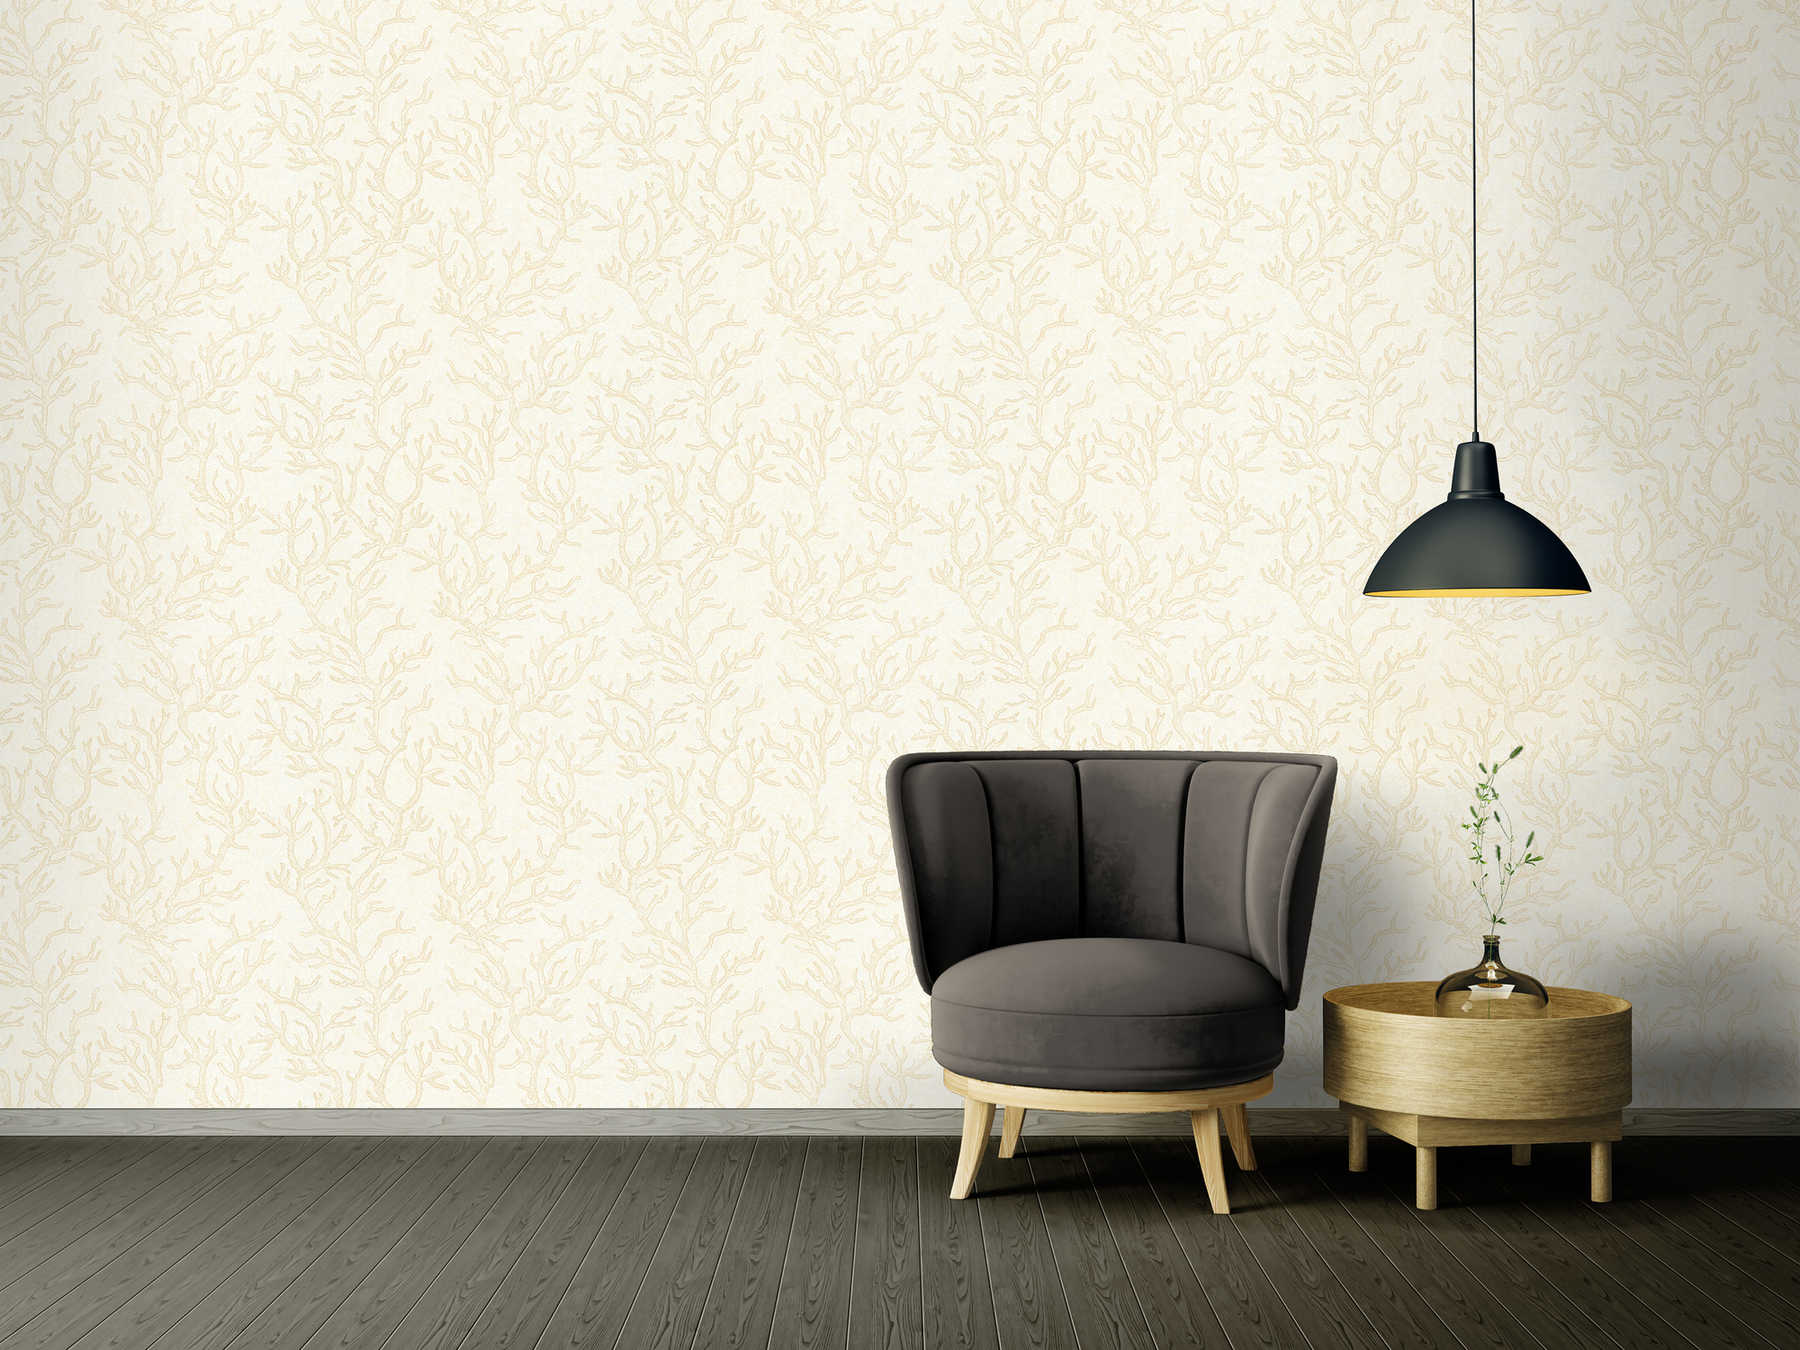             VERSACE wallpaper with coral & gold effect - cream, metallic
        